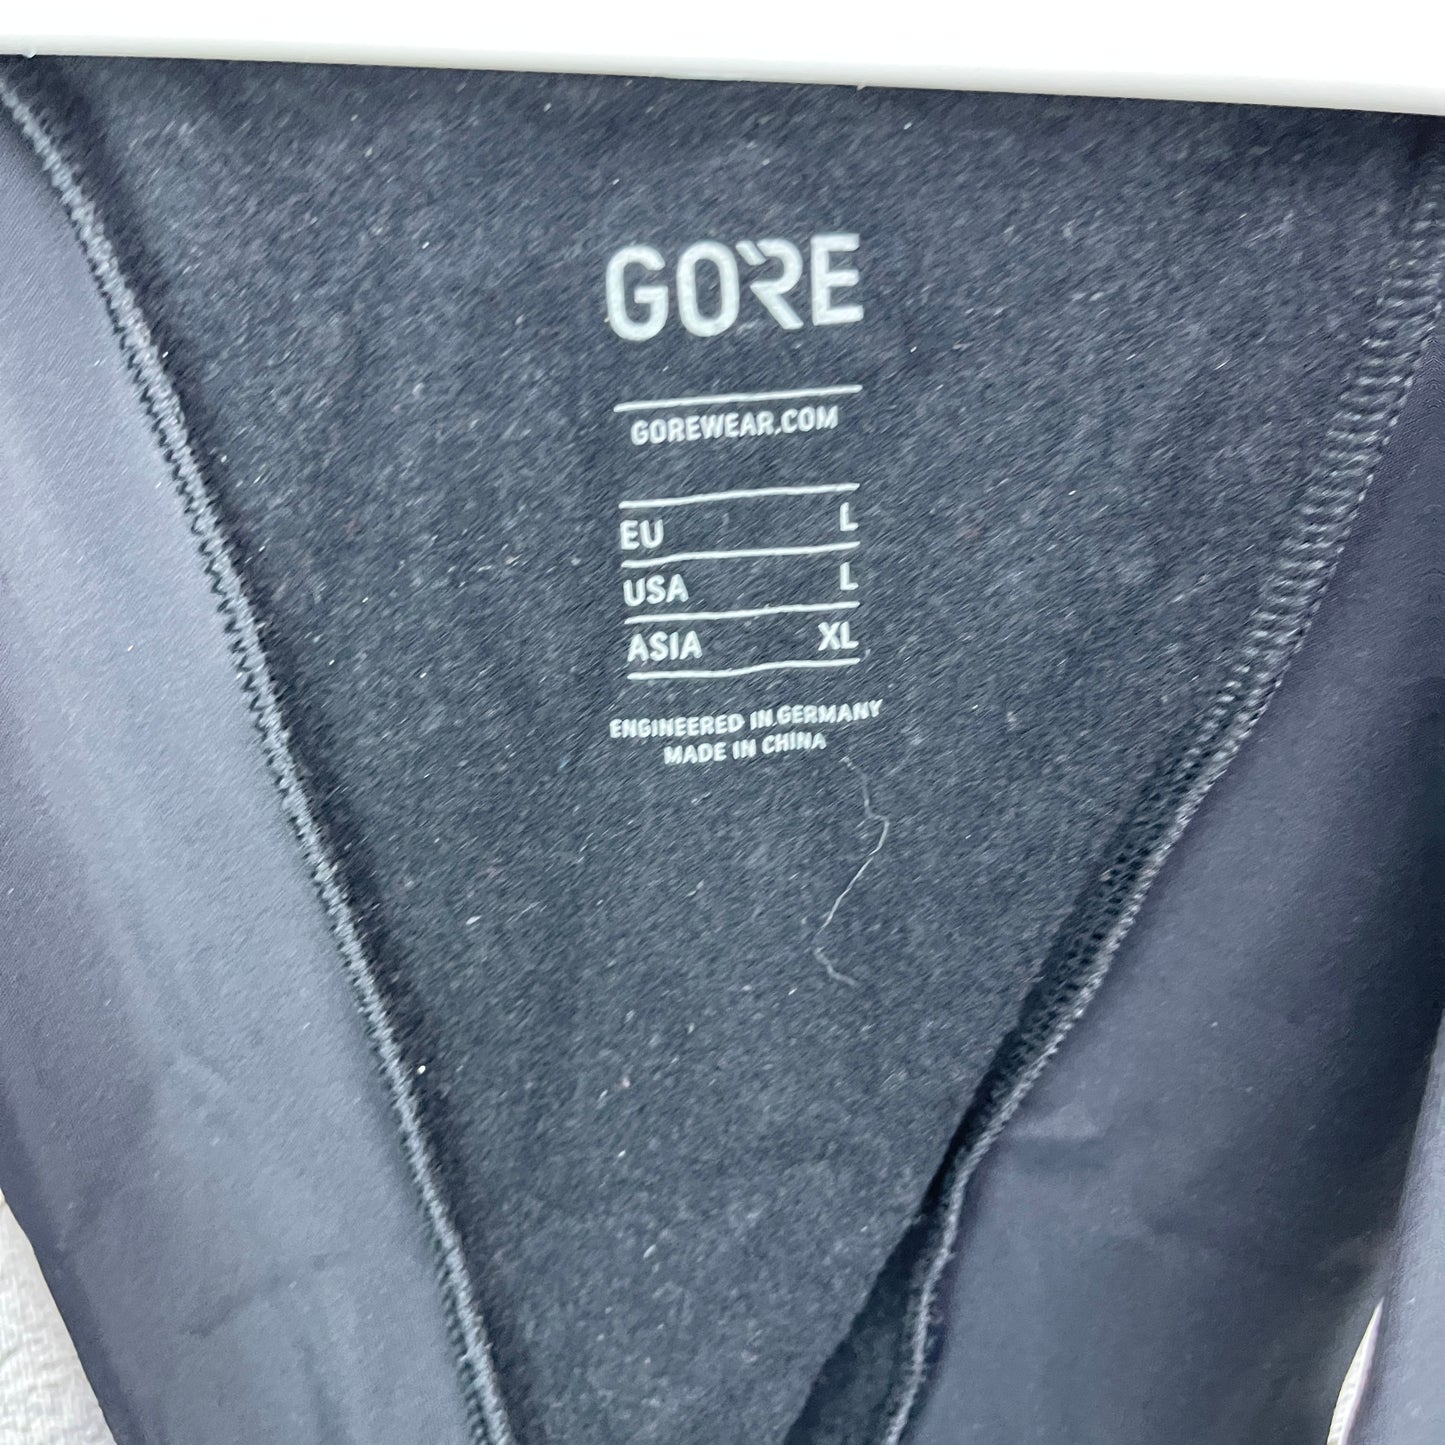 Used Once! Gore Windstopper Heavy Cycling Winter Bib with Chamois Black Men's XL